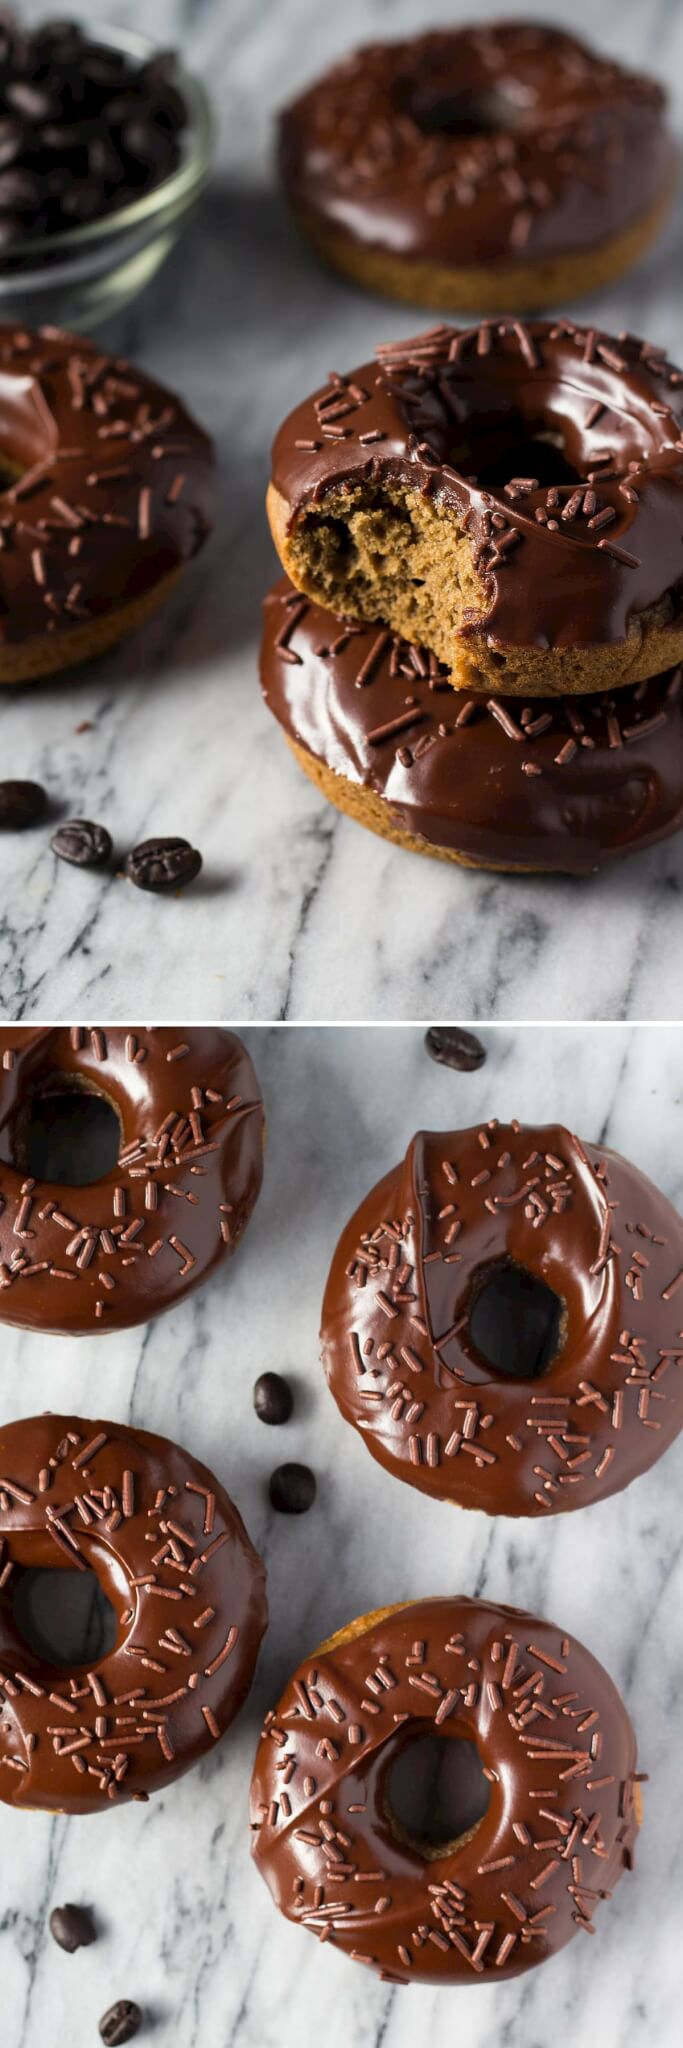 A delicious, coffee-flavored cake doughnut dipped in fudgy, chocolate glaze. These super easy Baked Mocha Doughnuts are the best way to get your morning caffeine fix!